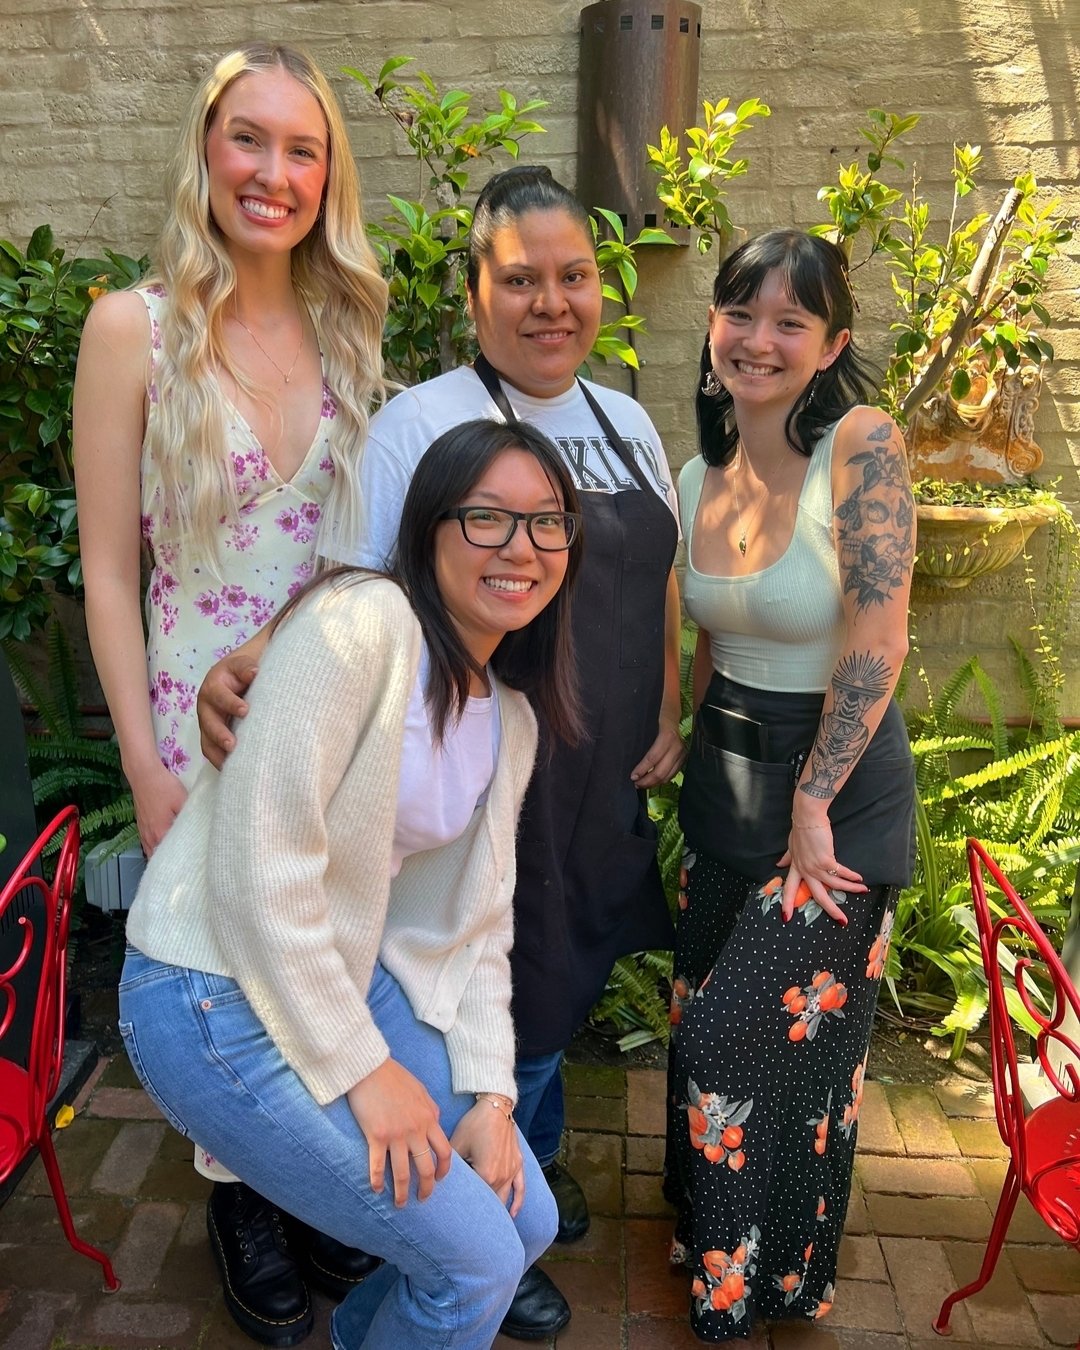 Wishing Christina and all of our Novo mom's (not pictured) a very happy Mother's Day!🌷

If you're looking to celebrate with us, brunch reservations are fully booked but we have some spots open for dinner. 

Please note, we will be closed from 2p-4pm